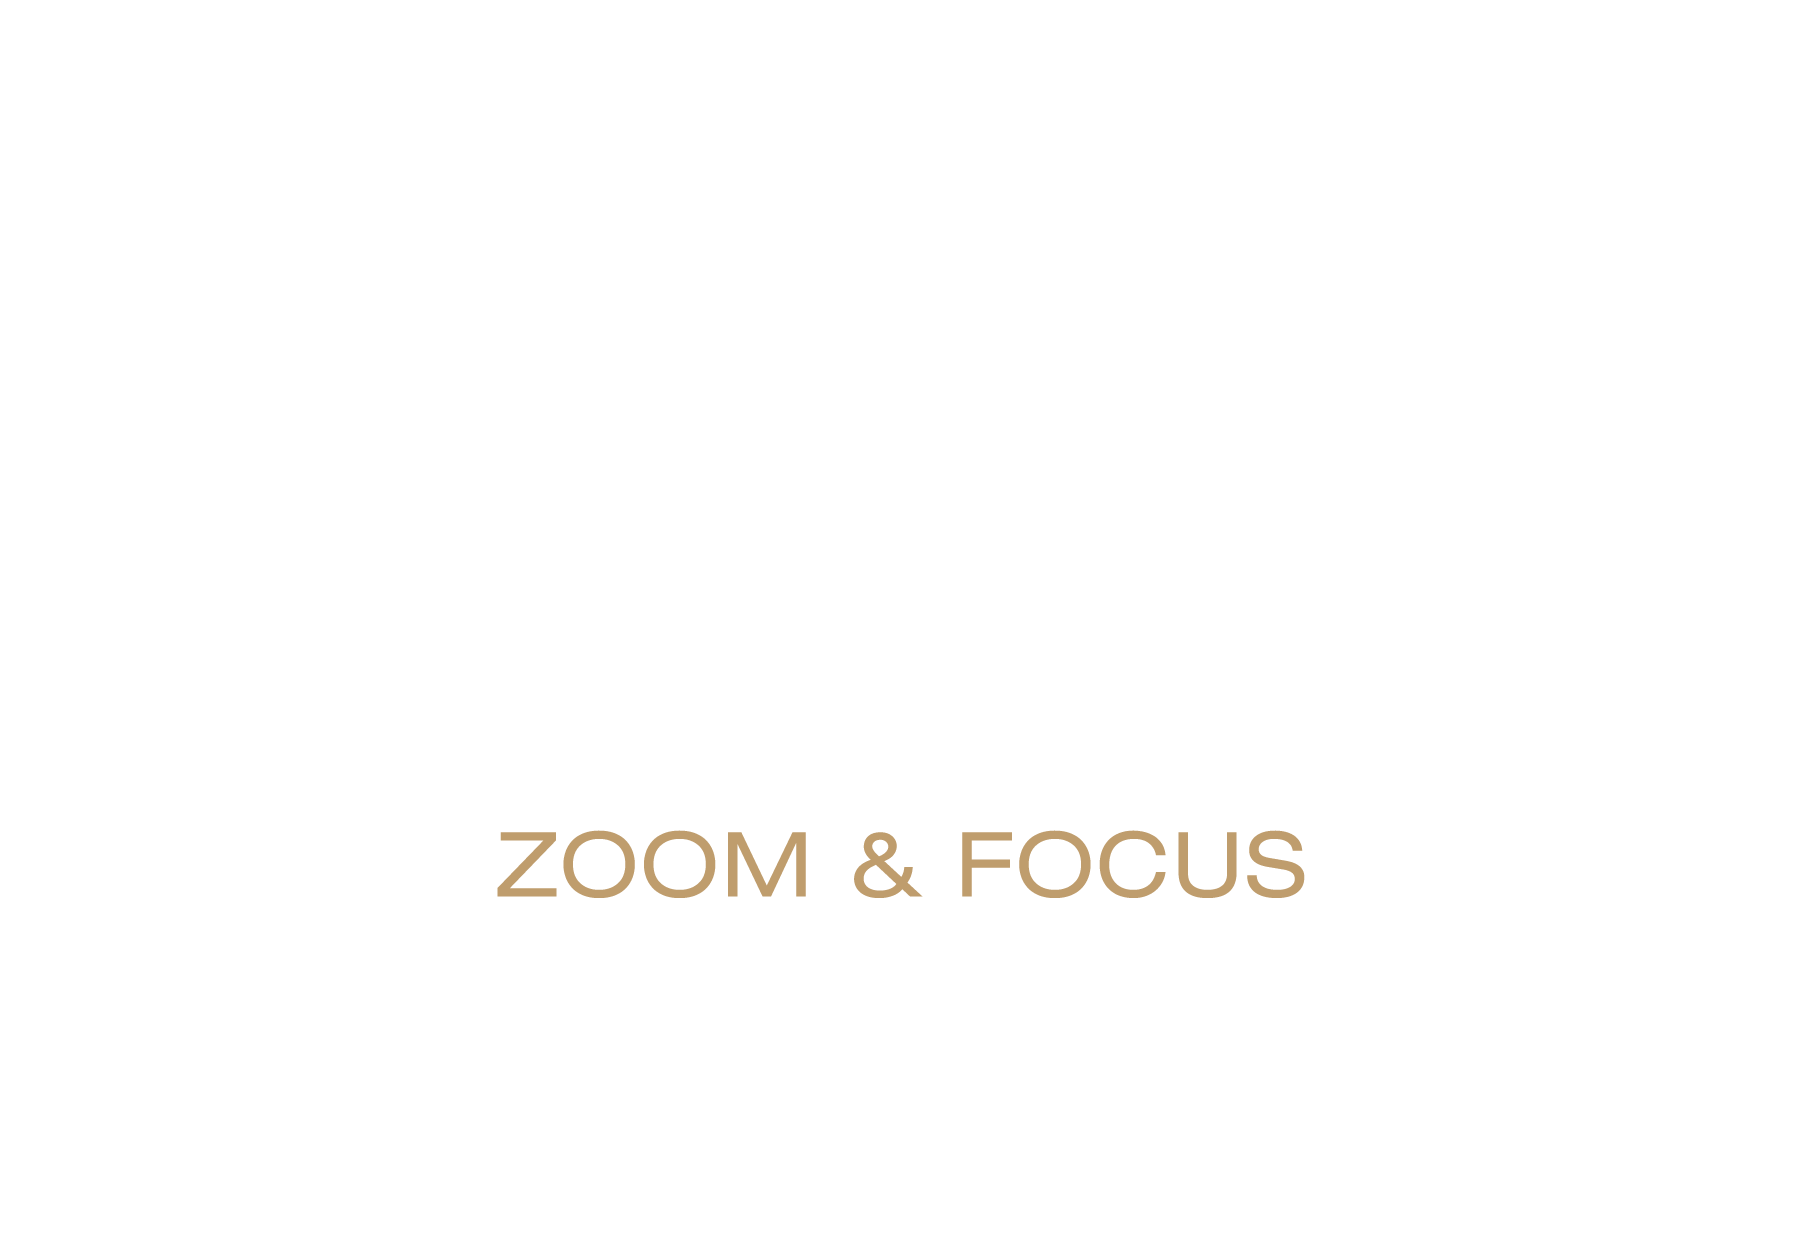 Memory Presets | Motorized Lens | Zoome & Focus